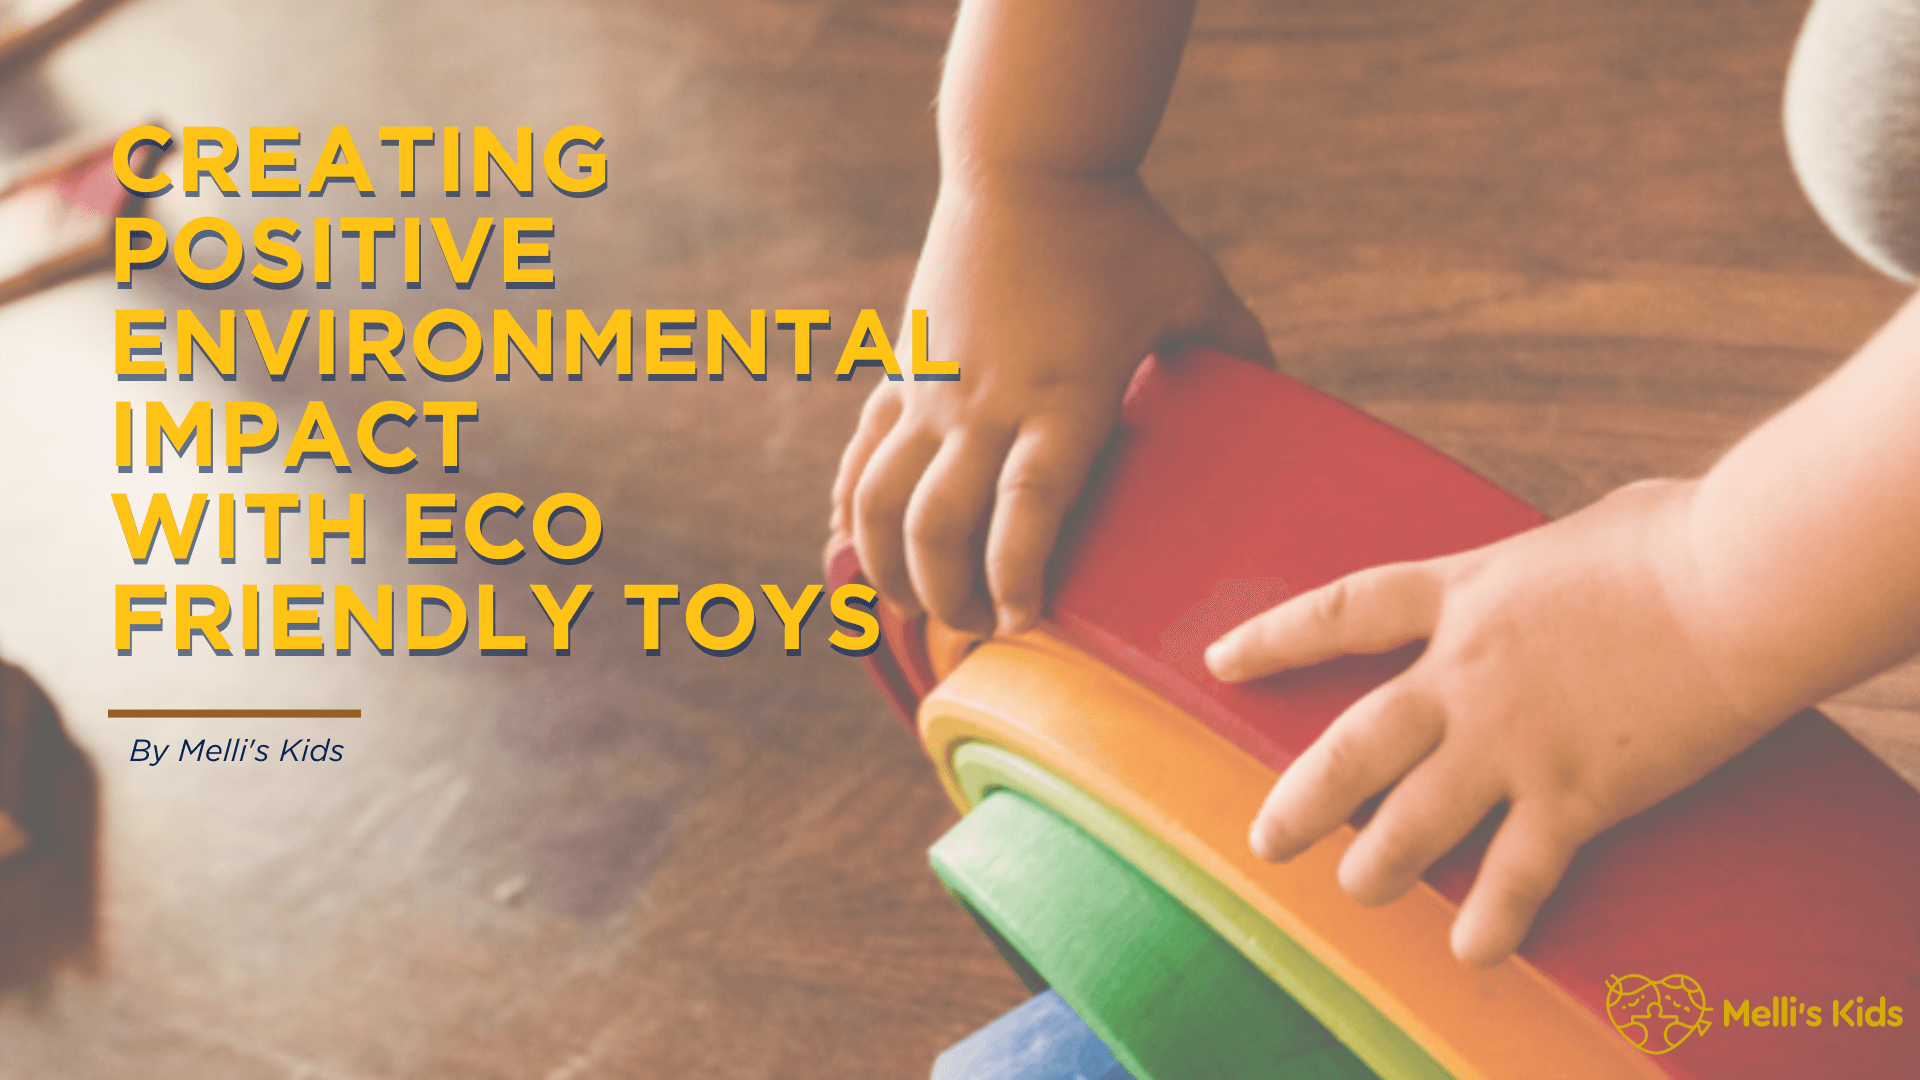 Creating environmental impact with eco-friendly toys - Melli's Kids